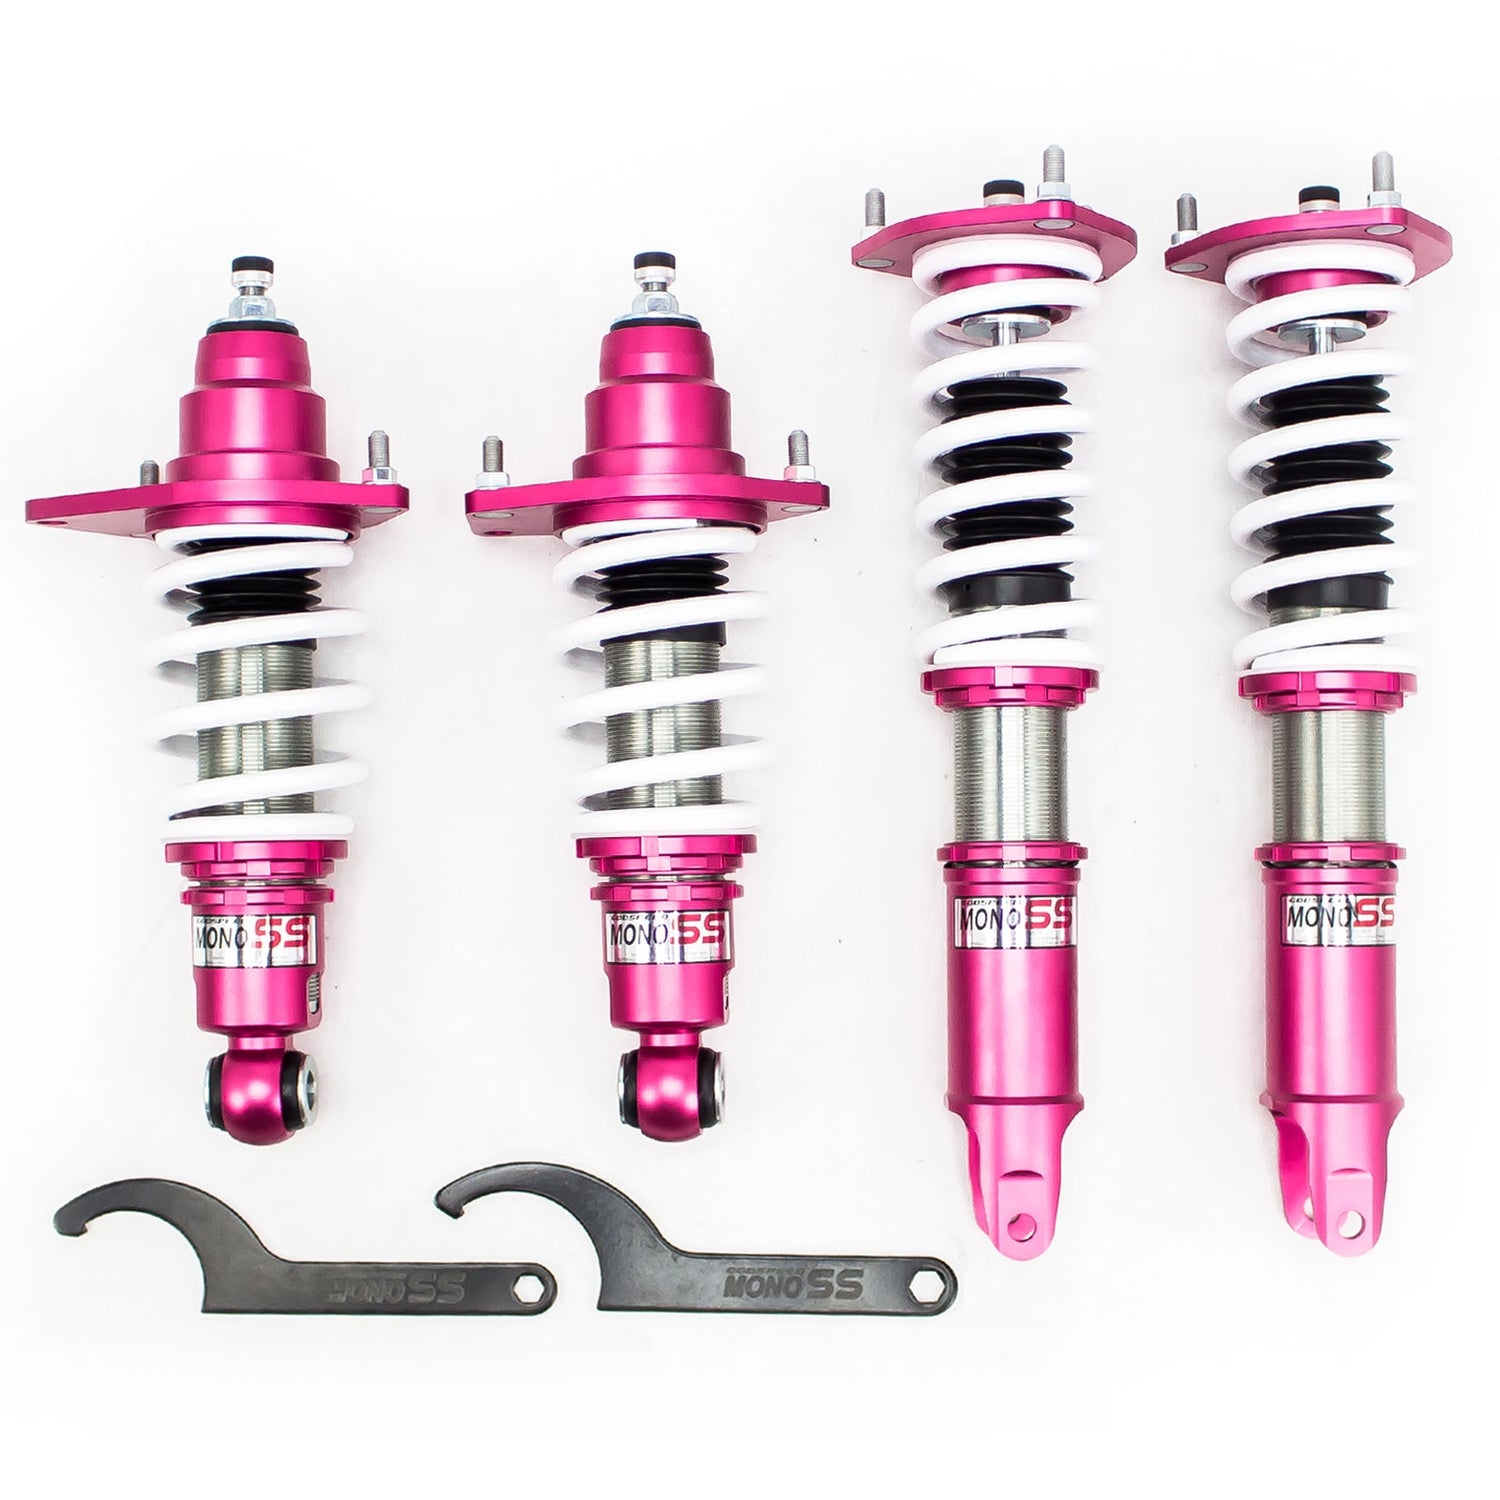 Godspeed MSS0147 MonoSS Coilover Lowering Kit, Fully Adjustable, Ride Height, Spring Tension And 16 Click Damping, Mazda Miata(NC) 2006-15